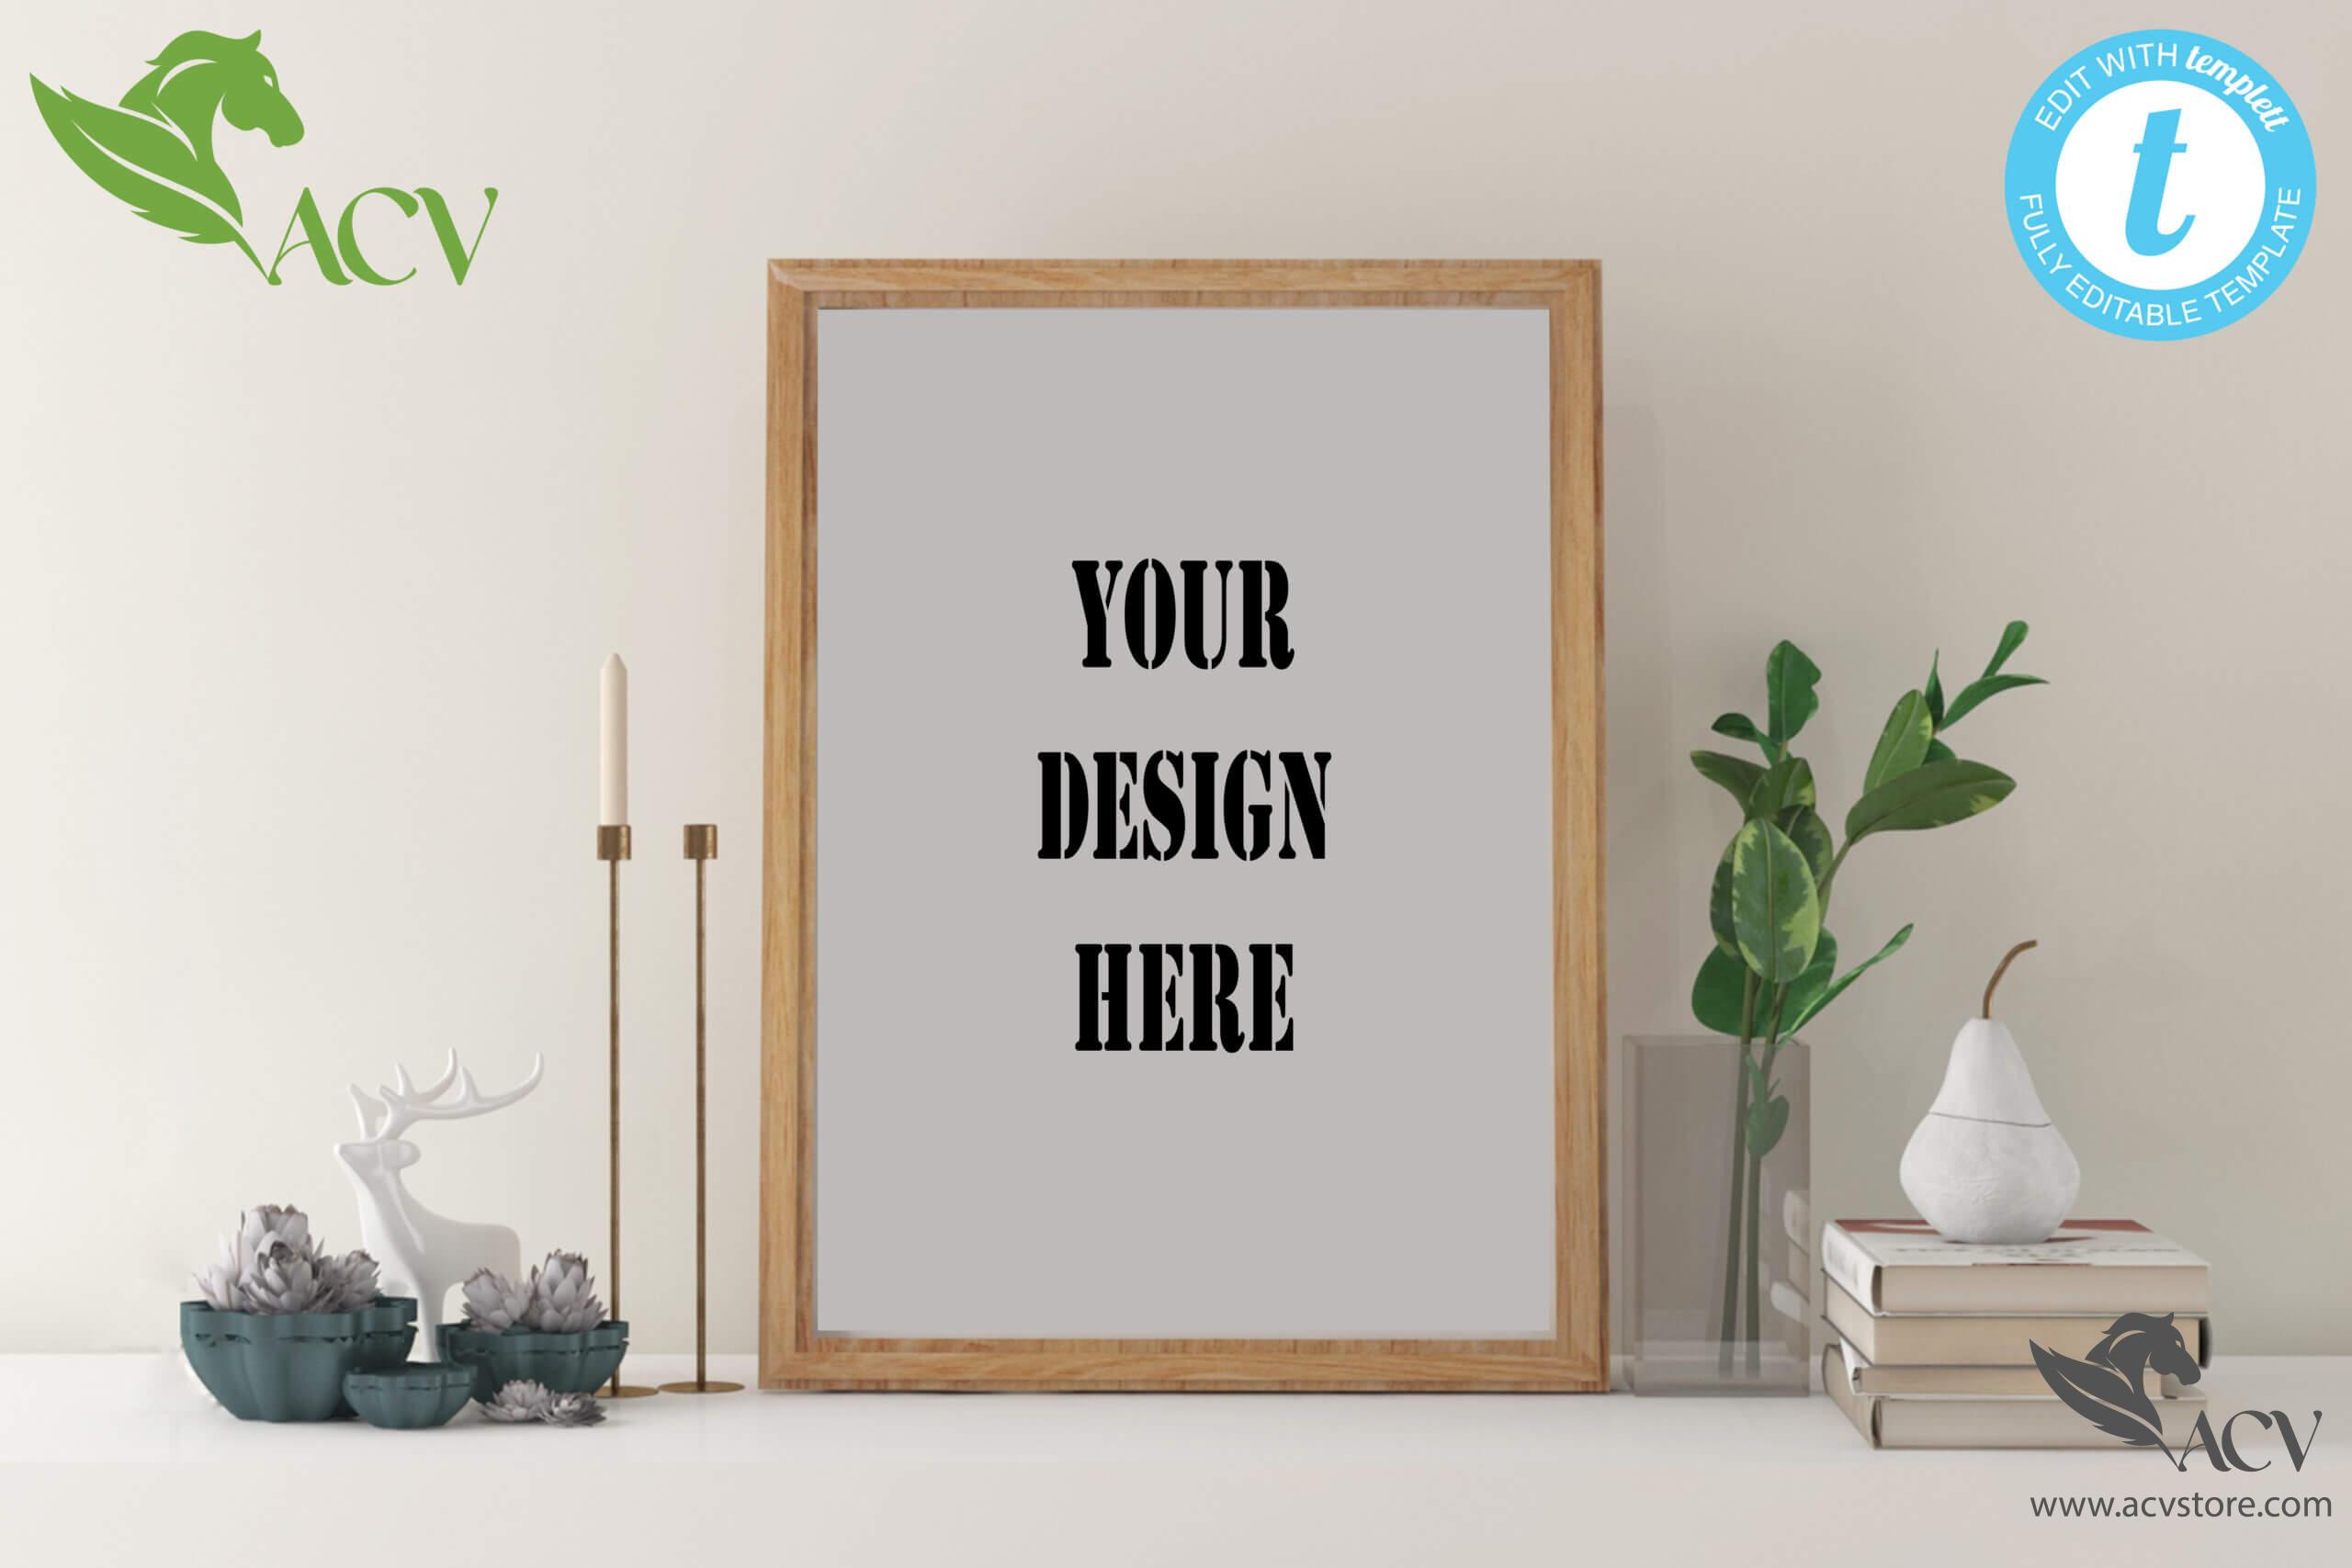 Download Templett Frame Mockup Frame Mock Up Simple Mockup Wooden Rustic Poster Mockup Wall Art Display Styled Stock Photography Acv Store